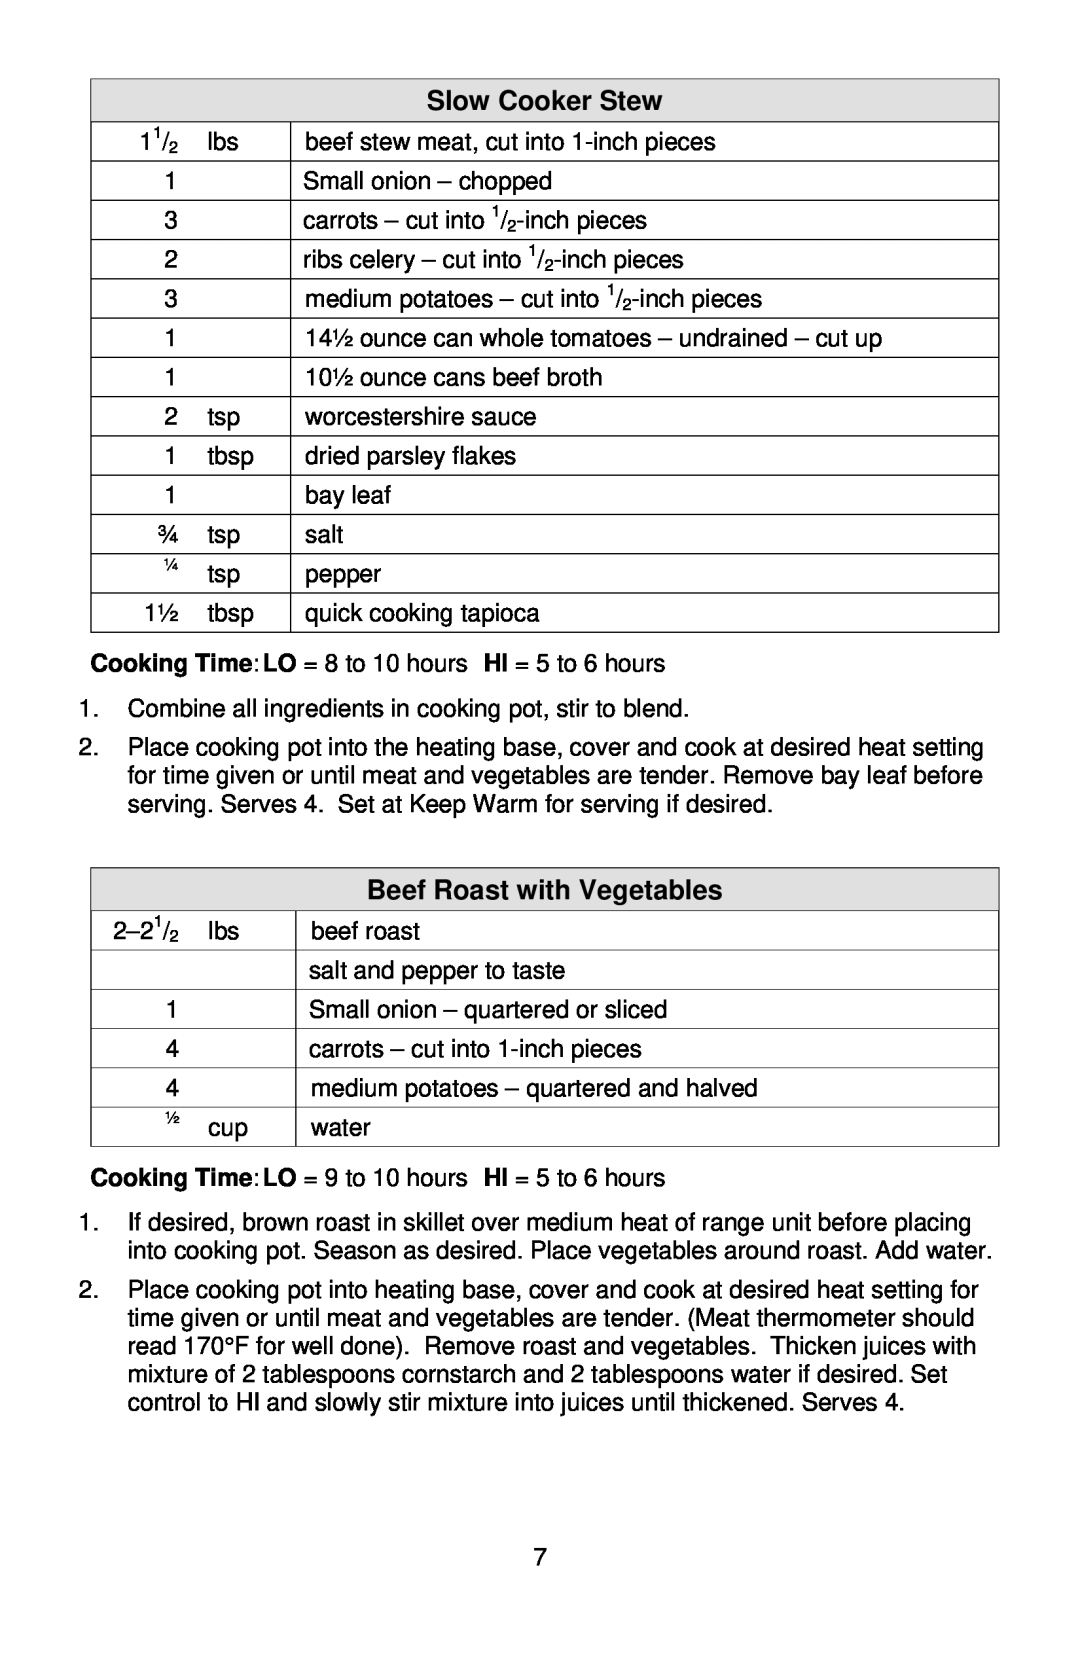 West Bend instruction manual Slow Cooker Stew, Beef Roast with Vegetables 